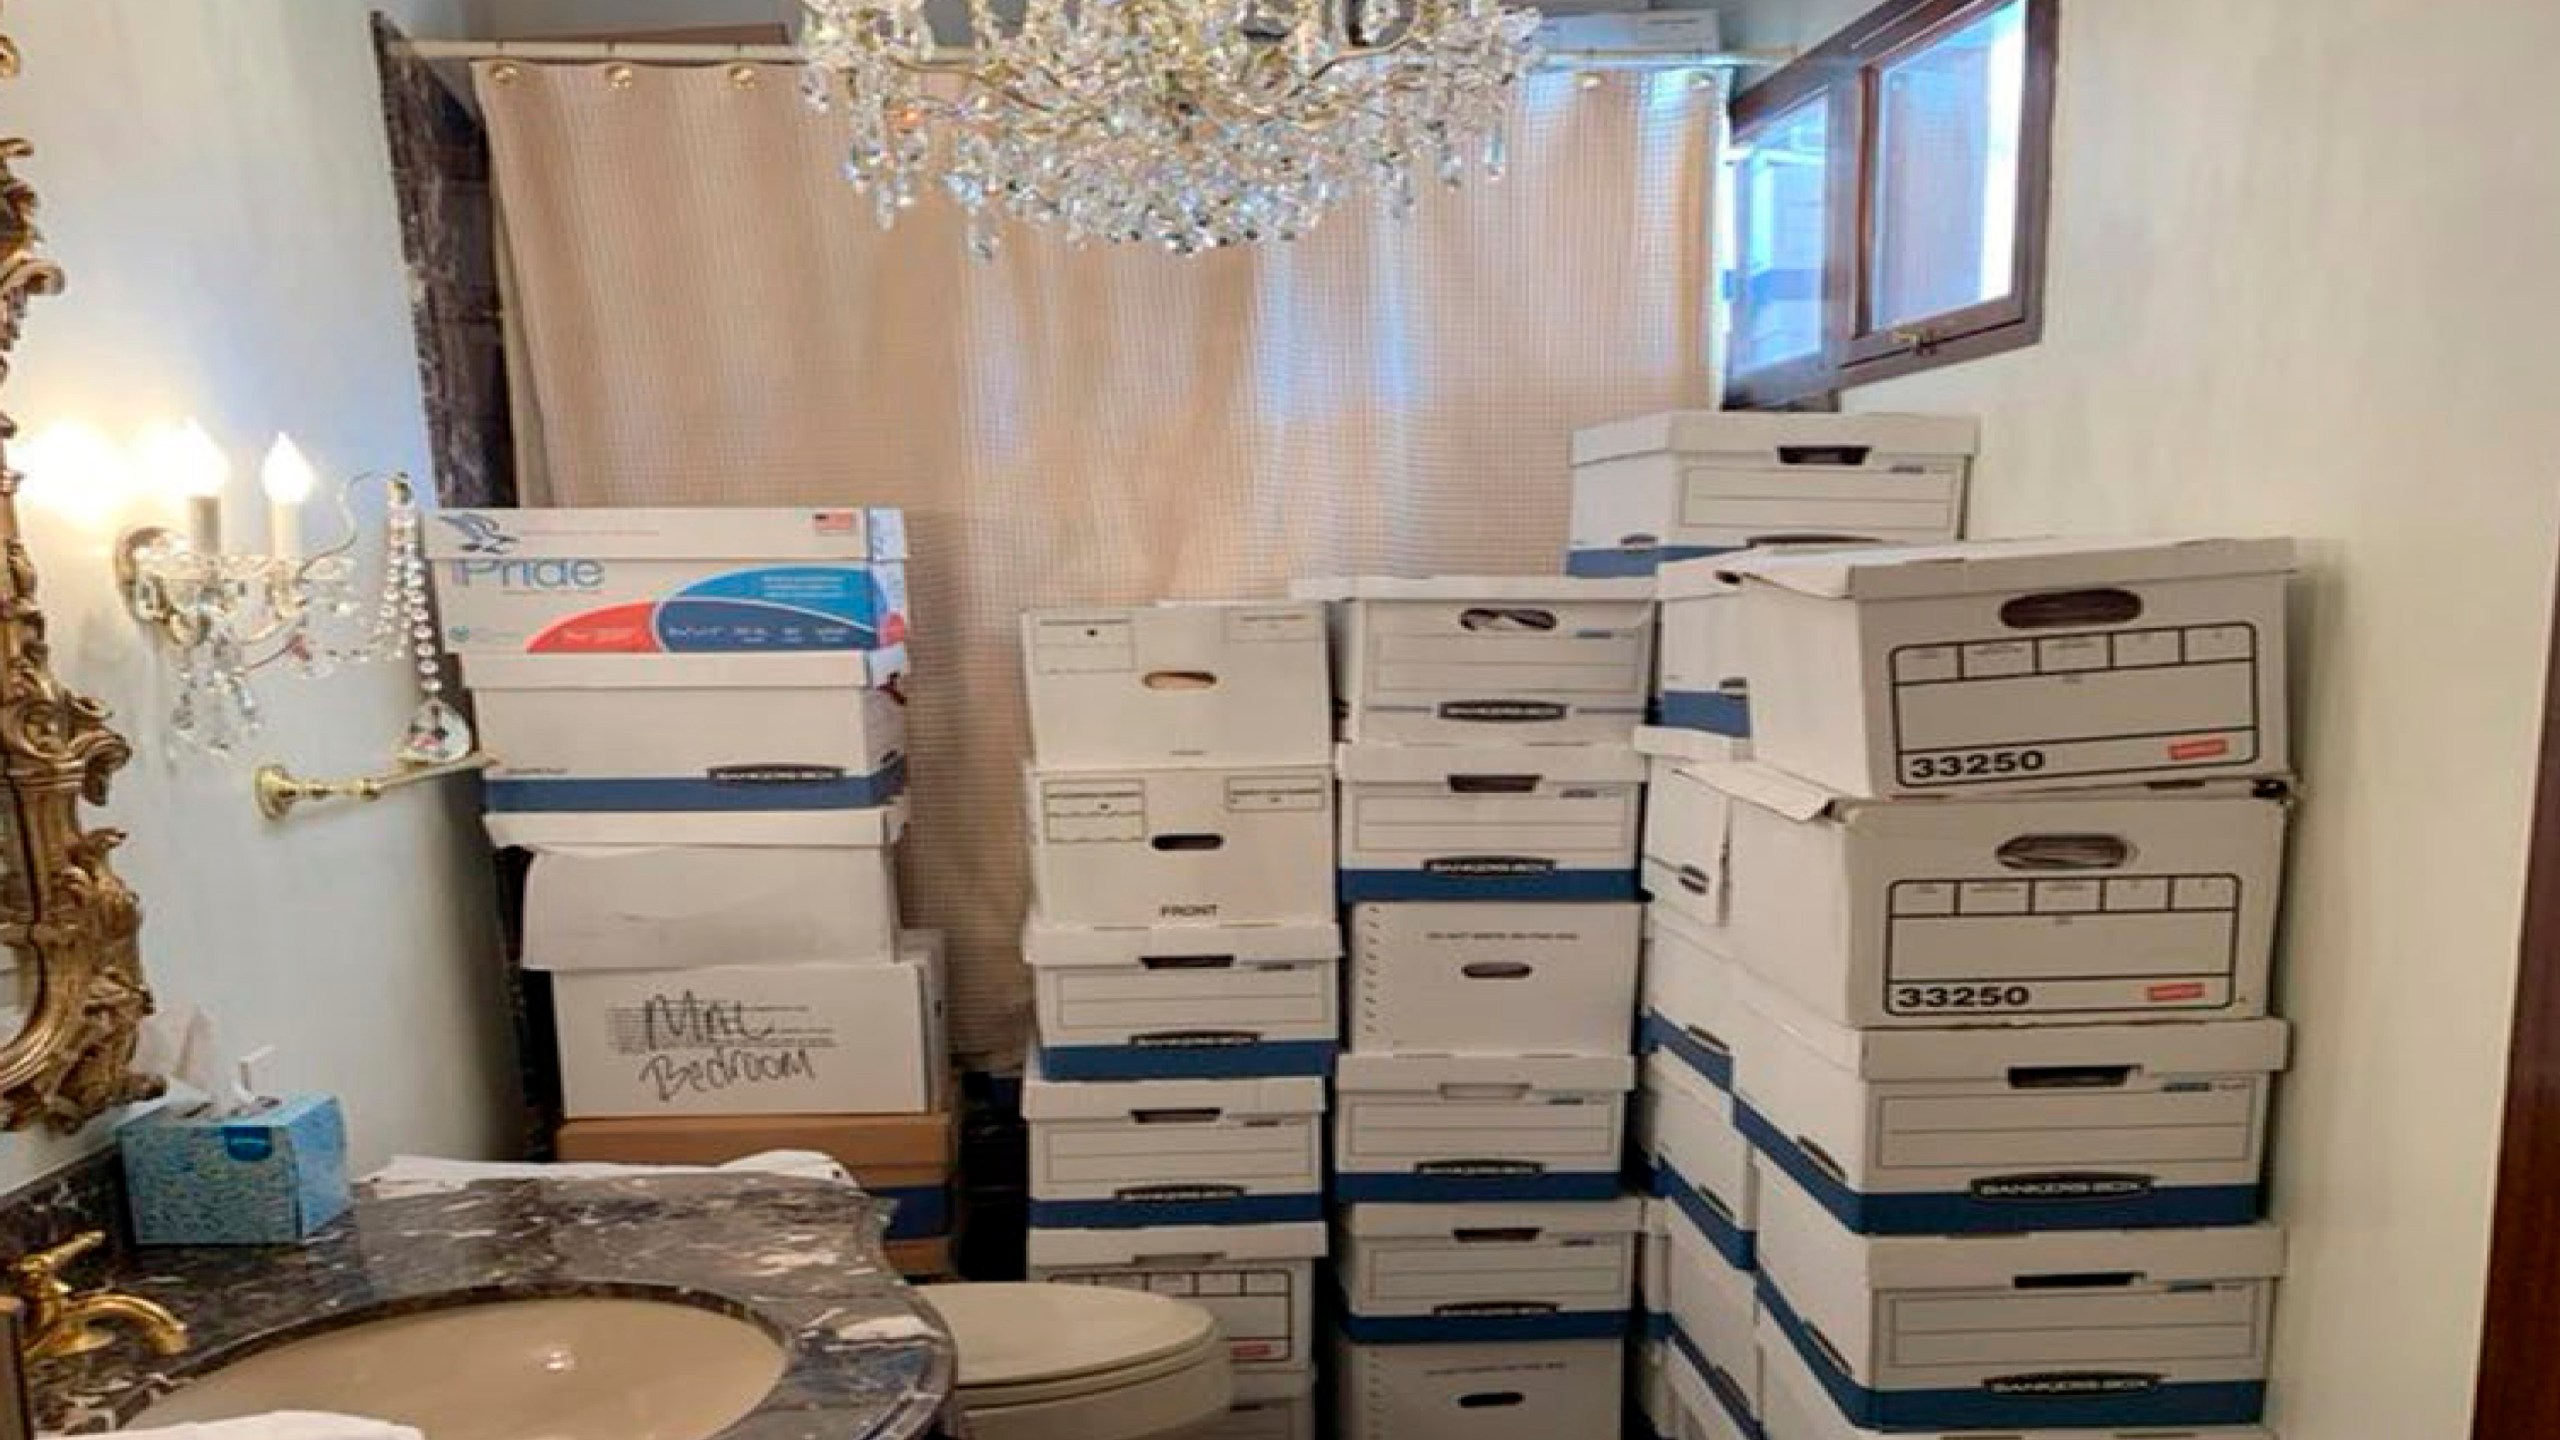 This image, contained in the indictment against former President Donald Trump, shows boxes of records stored in a bathroom and shower in the Lake Room at Trump's Mar-a-Lago estate in Palm Beach, Fla. The classified documents investigation of Donald Trump appeared to have clear momentum in 2022 when FBI agents who searched the former president’s Mar-a-Lago estate recovered dozens of boxes containing sensitive documents. But each passing day brings mounting doubts that the case can reach trial this year. The judge has yet to set a firm trial date despite holding two hours-long hearings with lawyers this month. (Justice Department via AP)